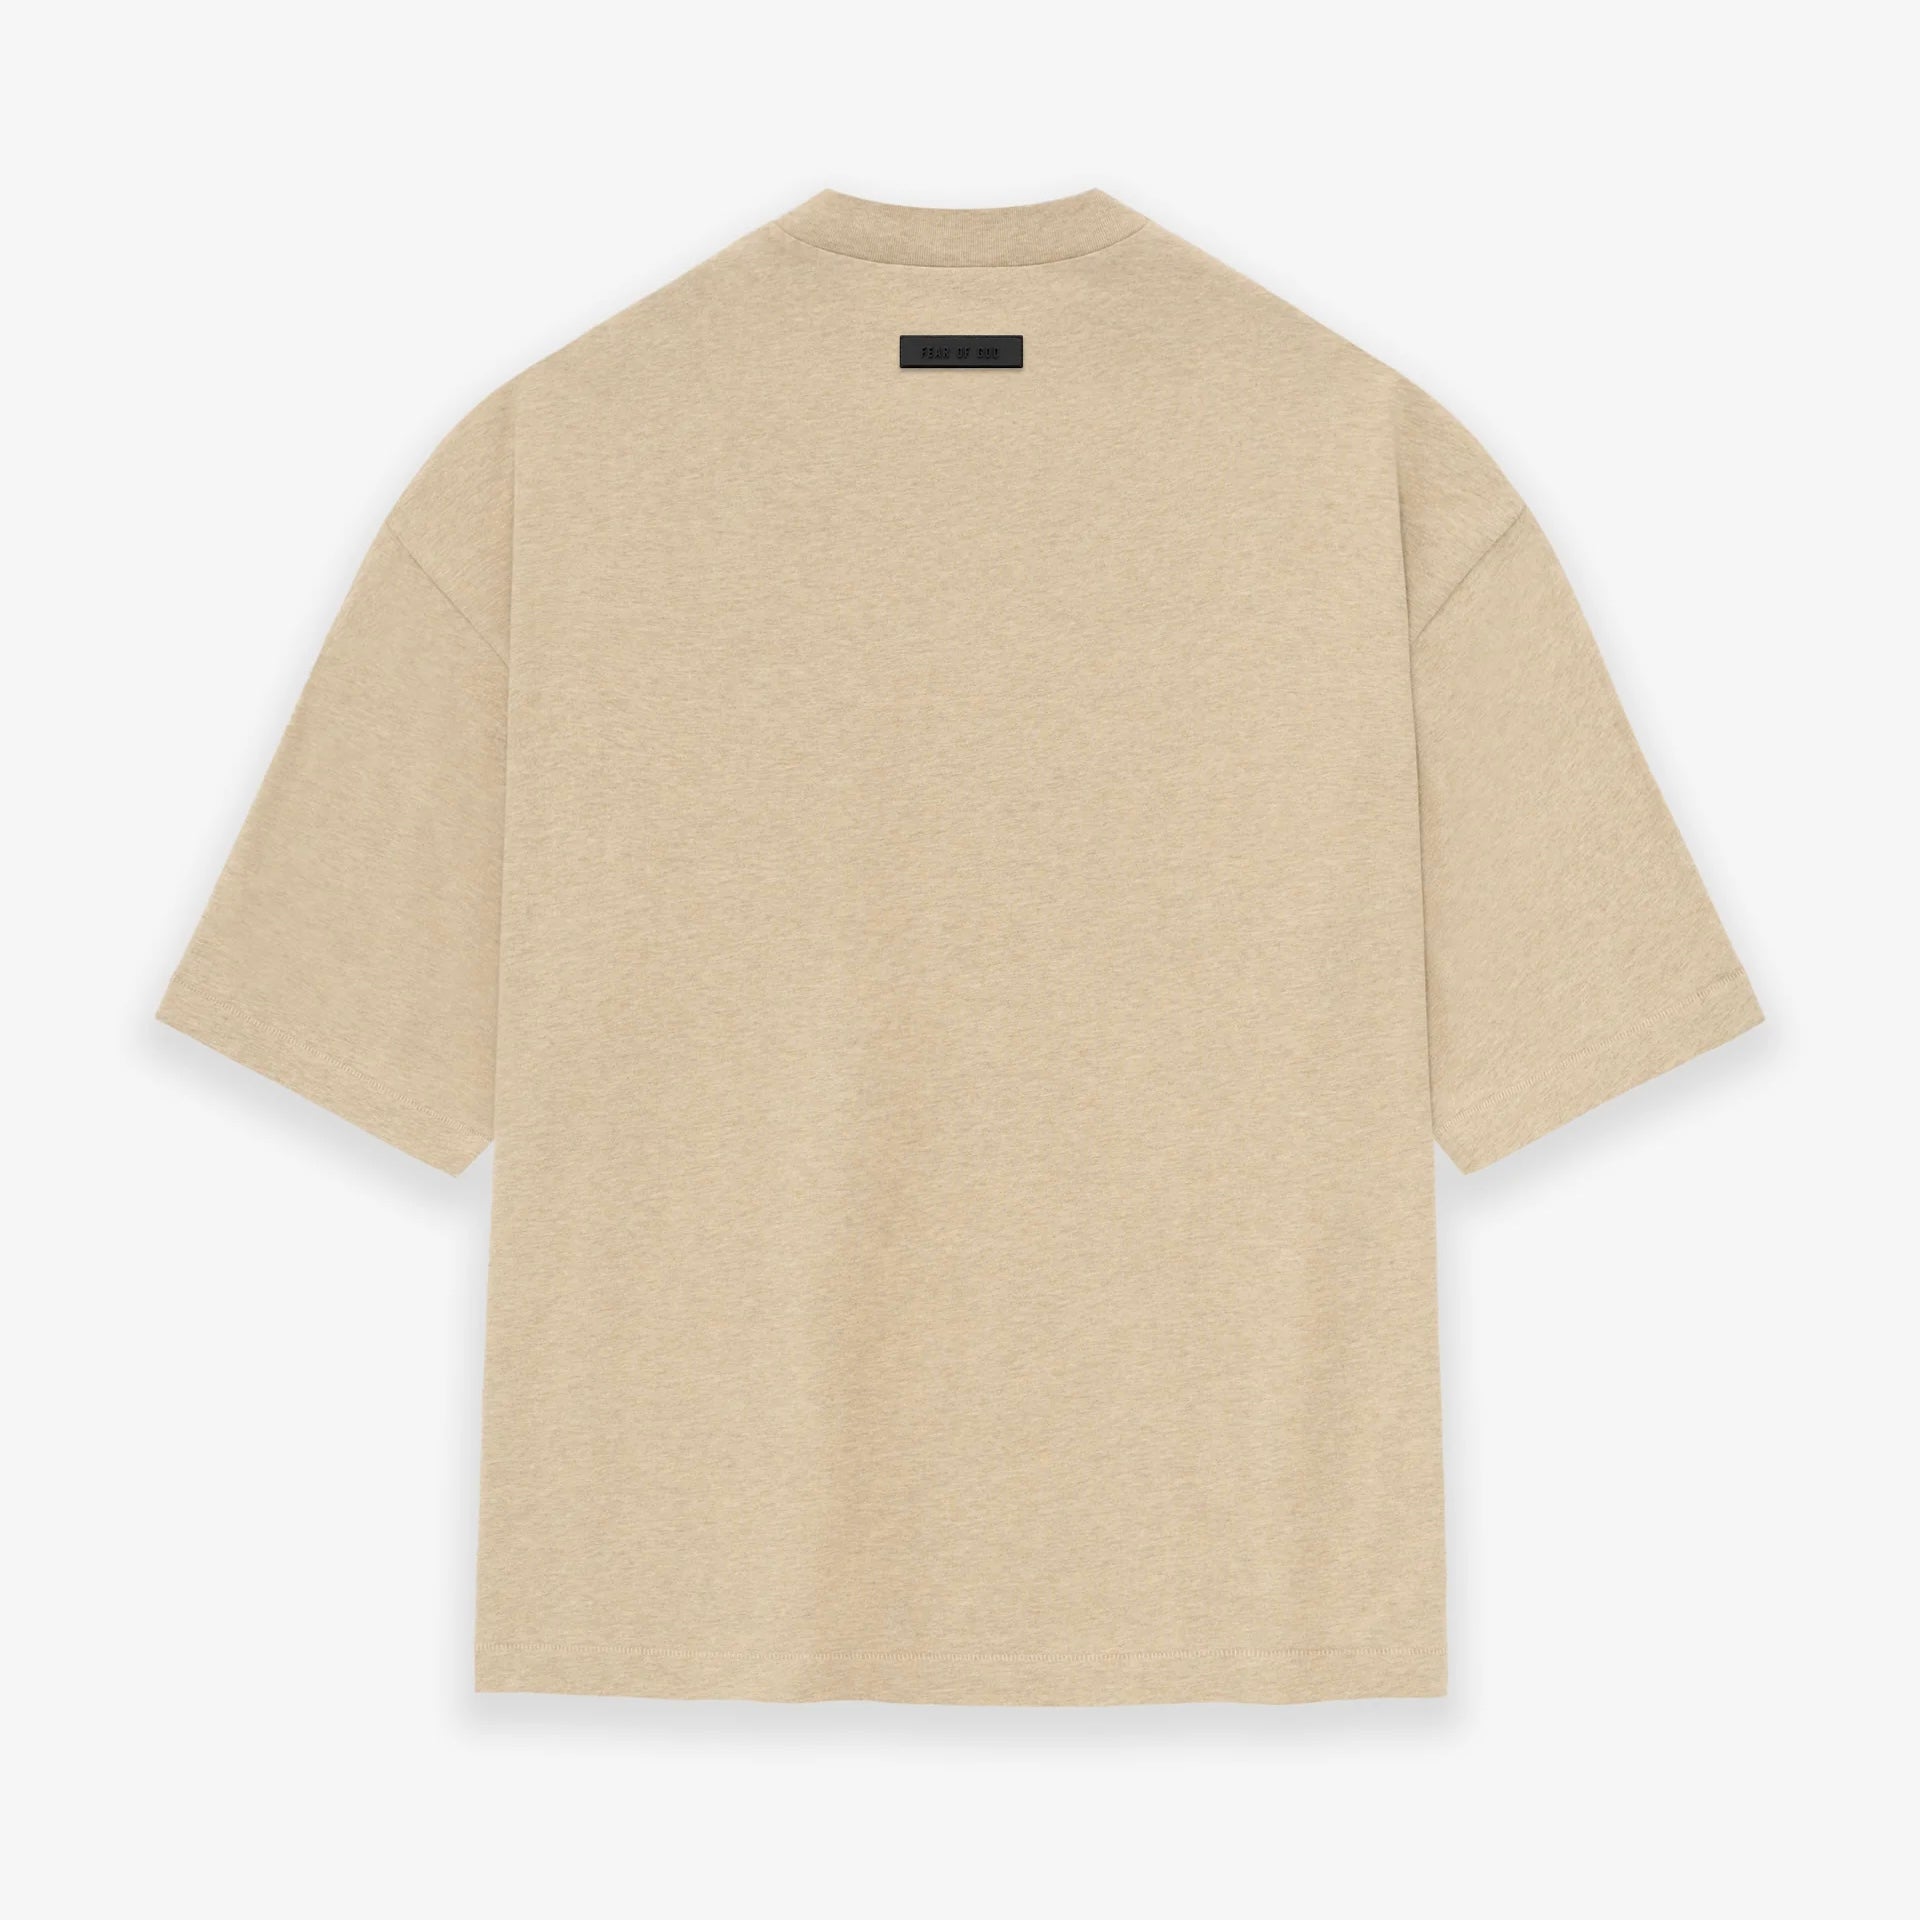 Fear of God Essentials Gold Heather T-Shirt Back View